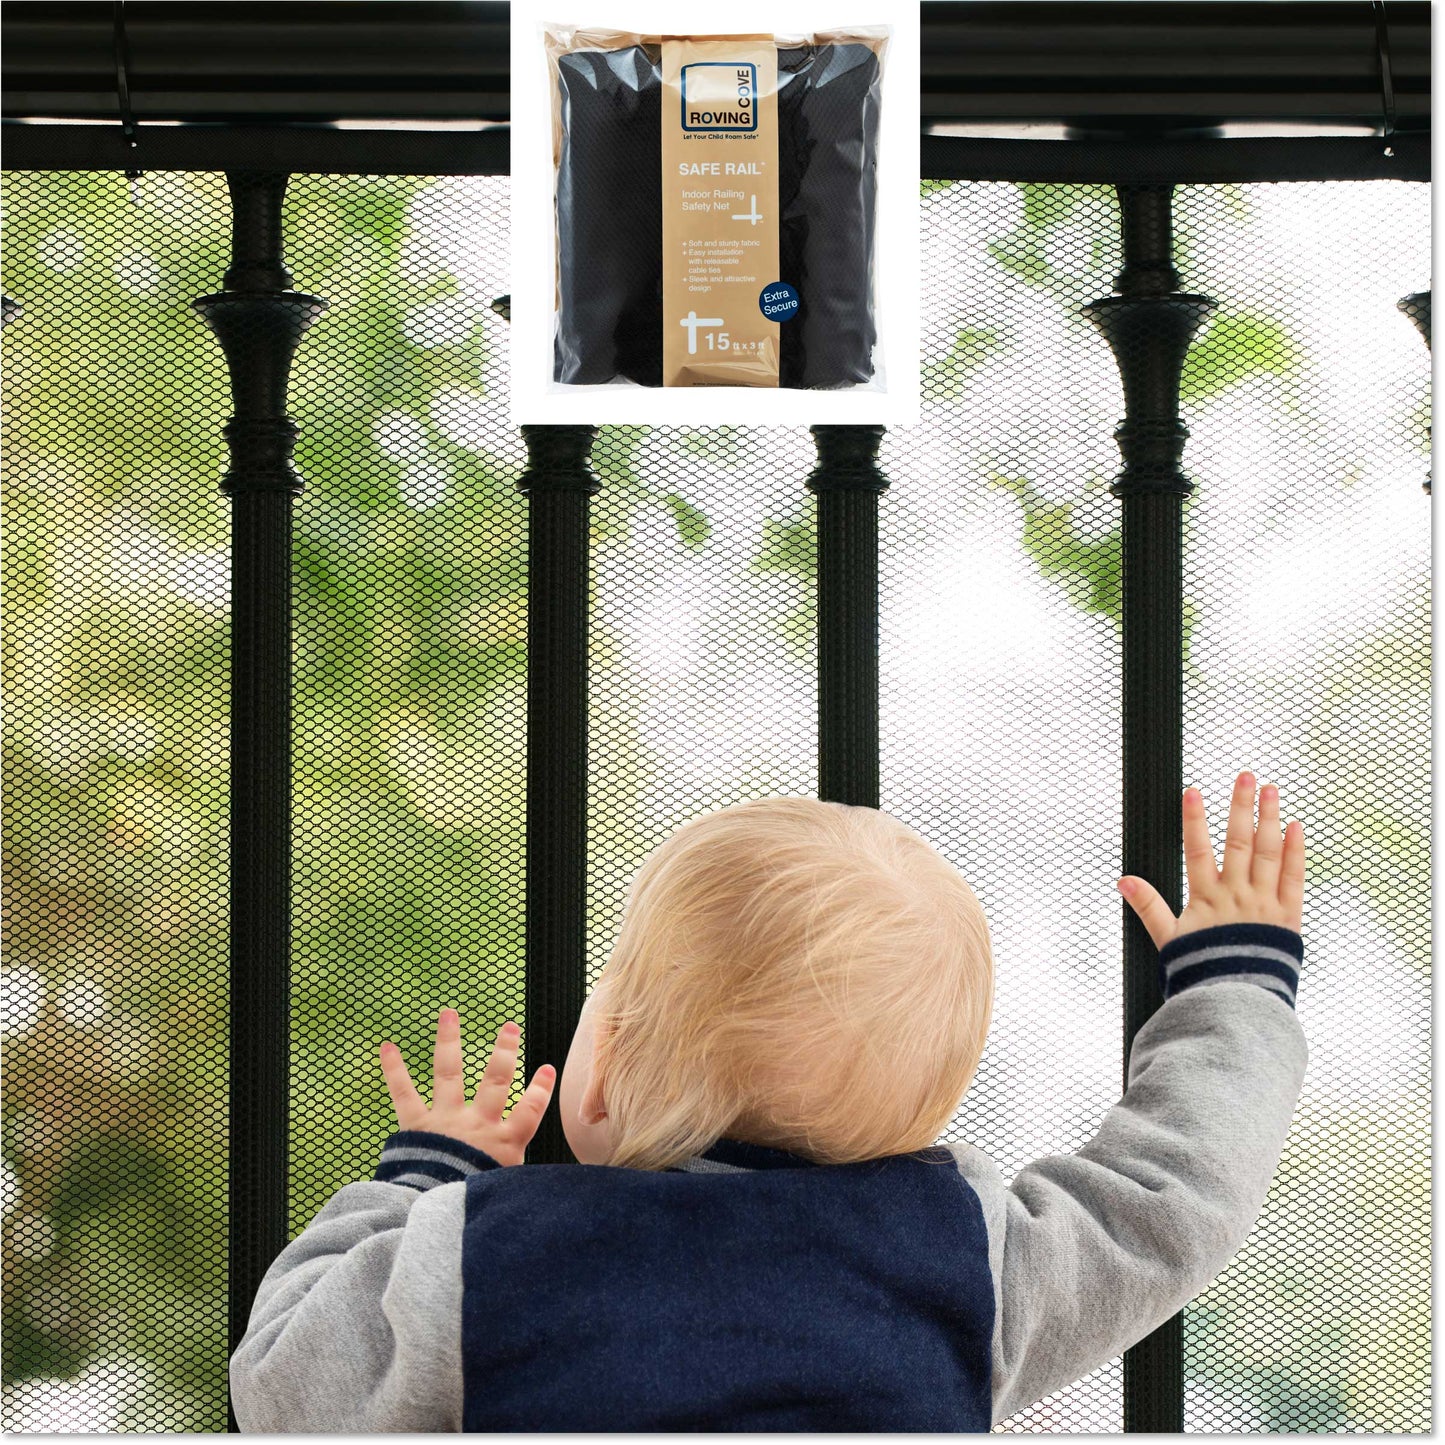 Roving Cove Indoor and Outdoor Banister Guard and Railing Safety Net for baby proofing stairway railing, deck, patio, balcony and beyond. Keep your babies, pets and toys from falling through banisters. Available on Amazon. 